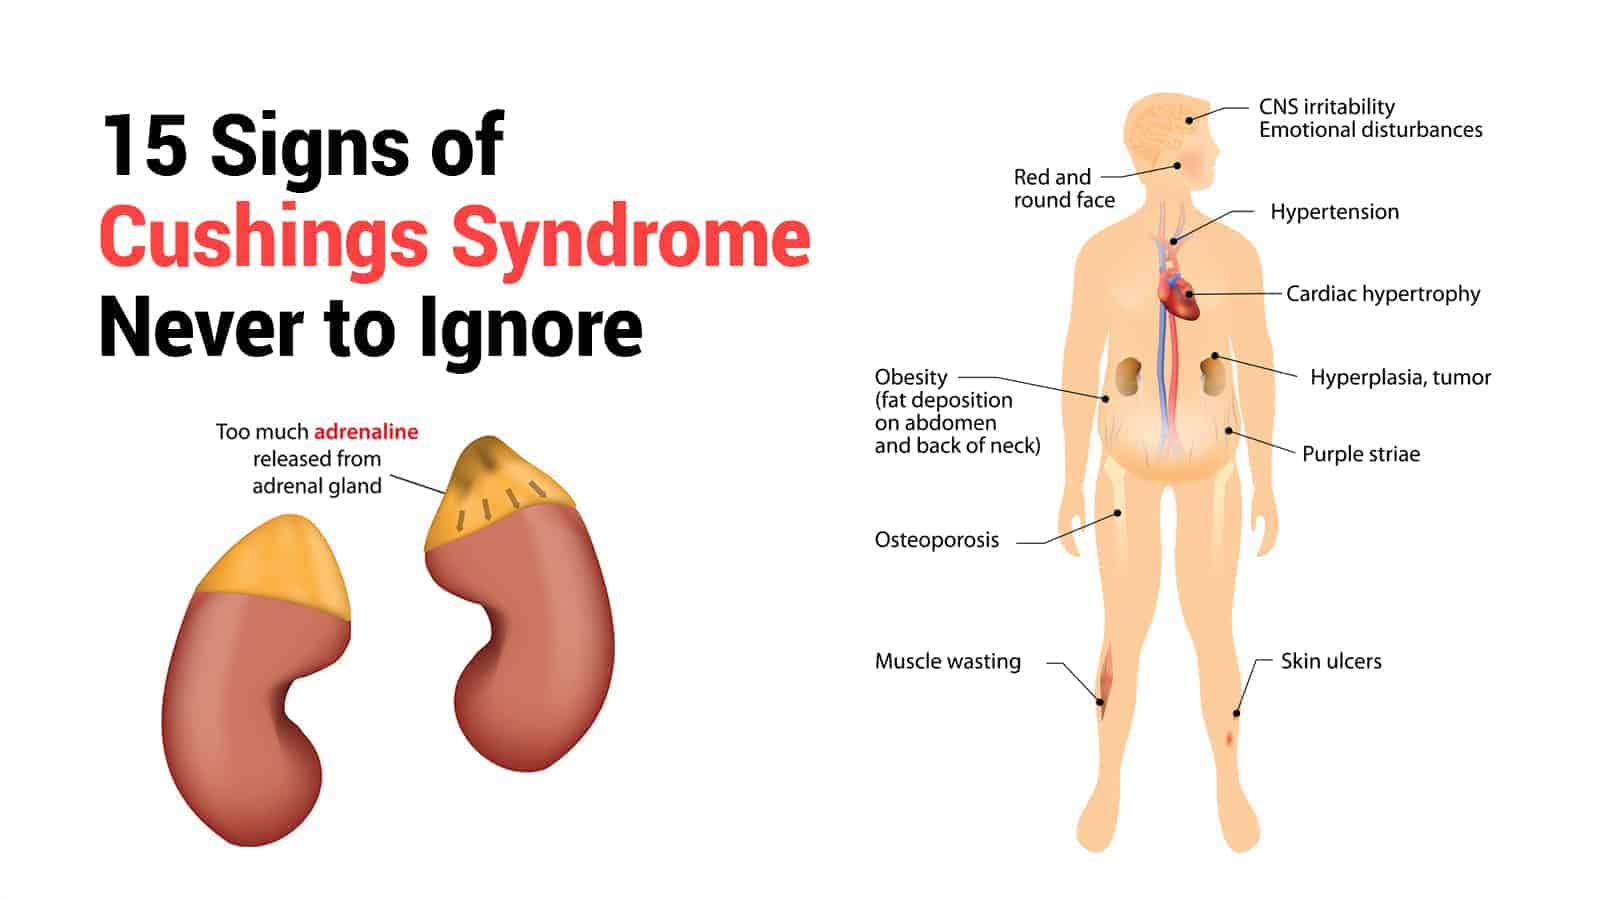 15 Signs of Cushings Syndrome Never to Ignore